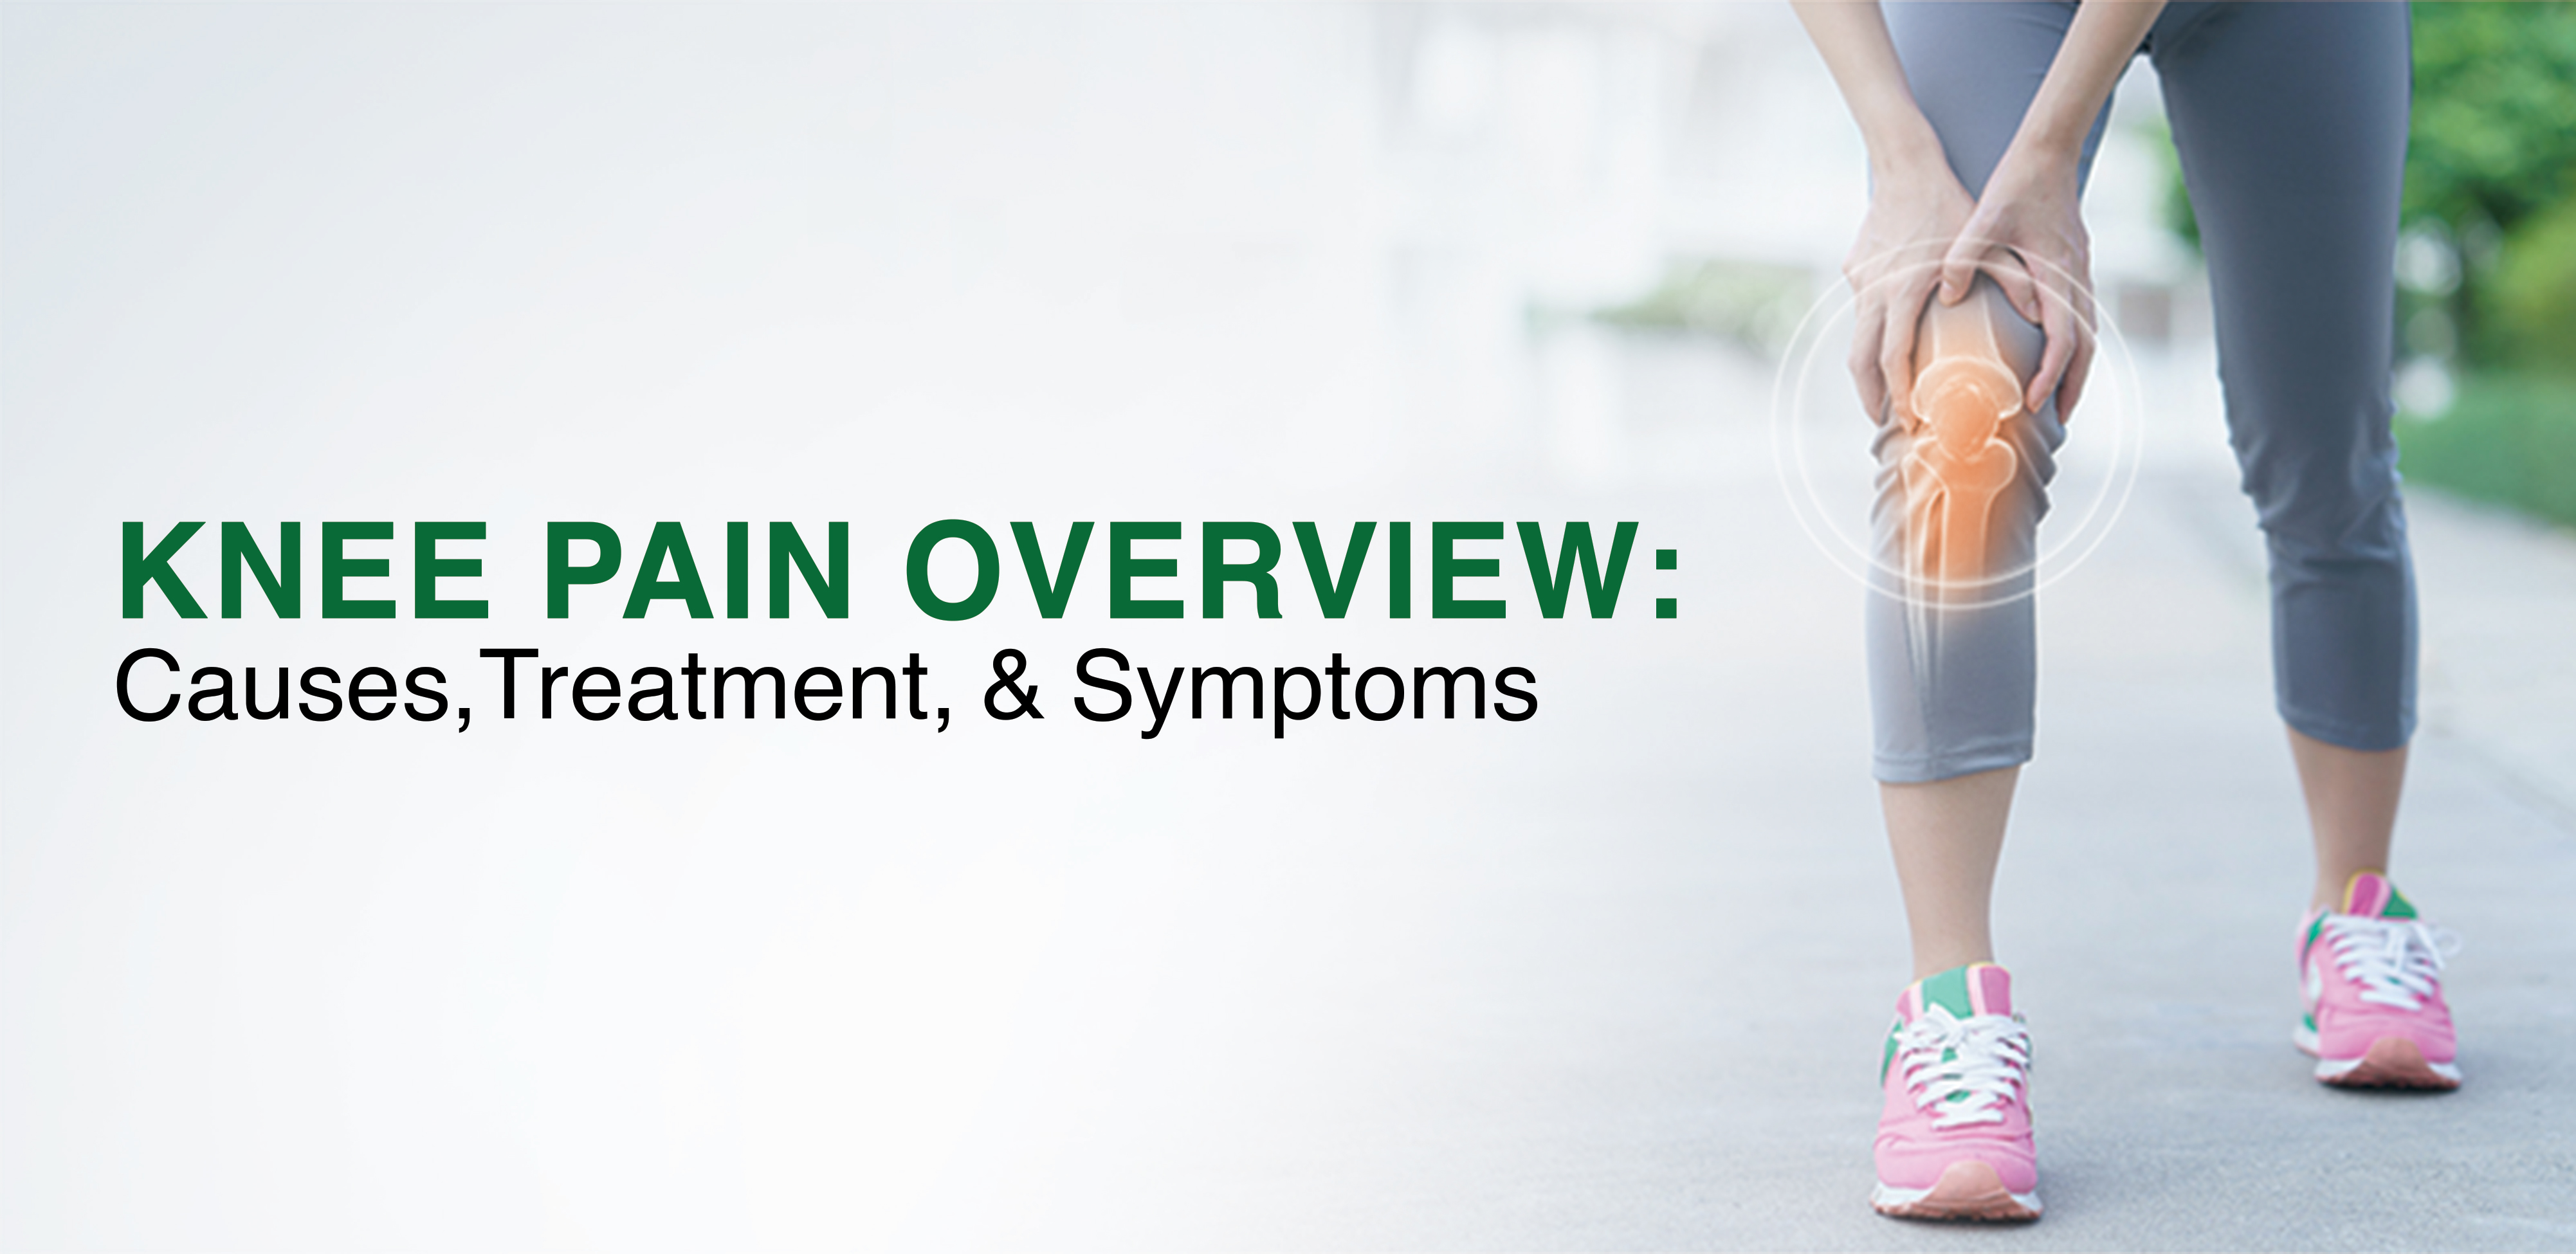 Anterior Knee Pain - Pain At The Front Of The Knee - Causes & Symptoms